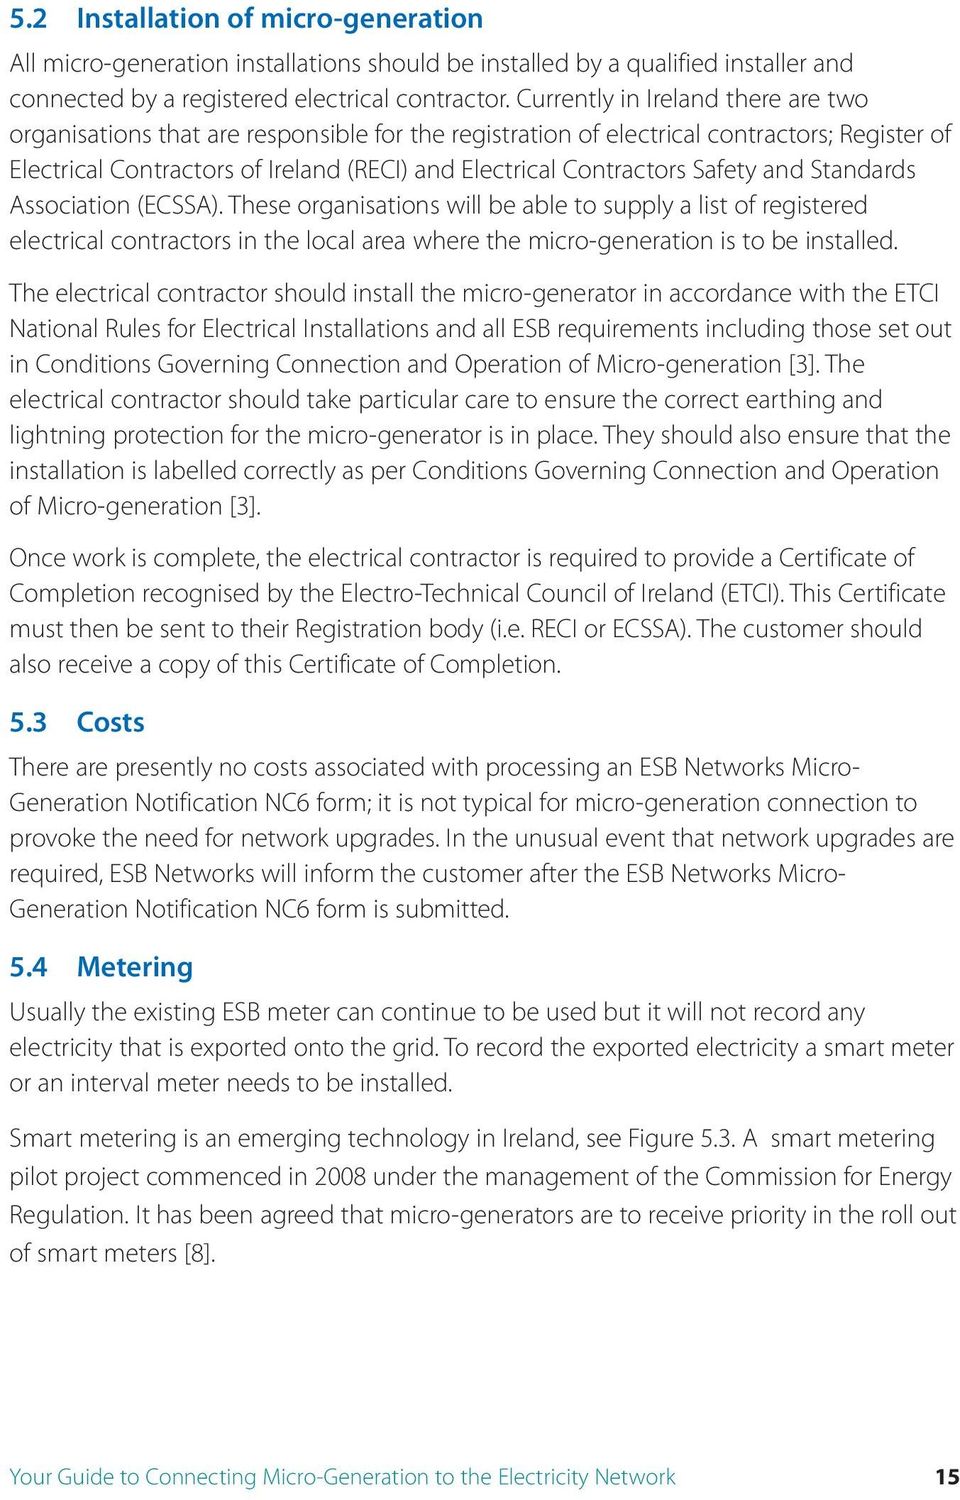 ((TOP)) Etci National Rules For Electrical Installations Inc page_17